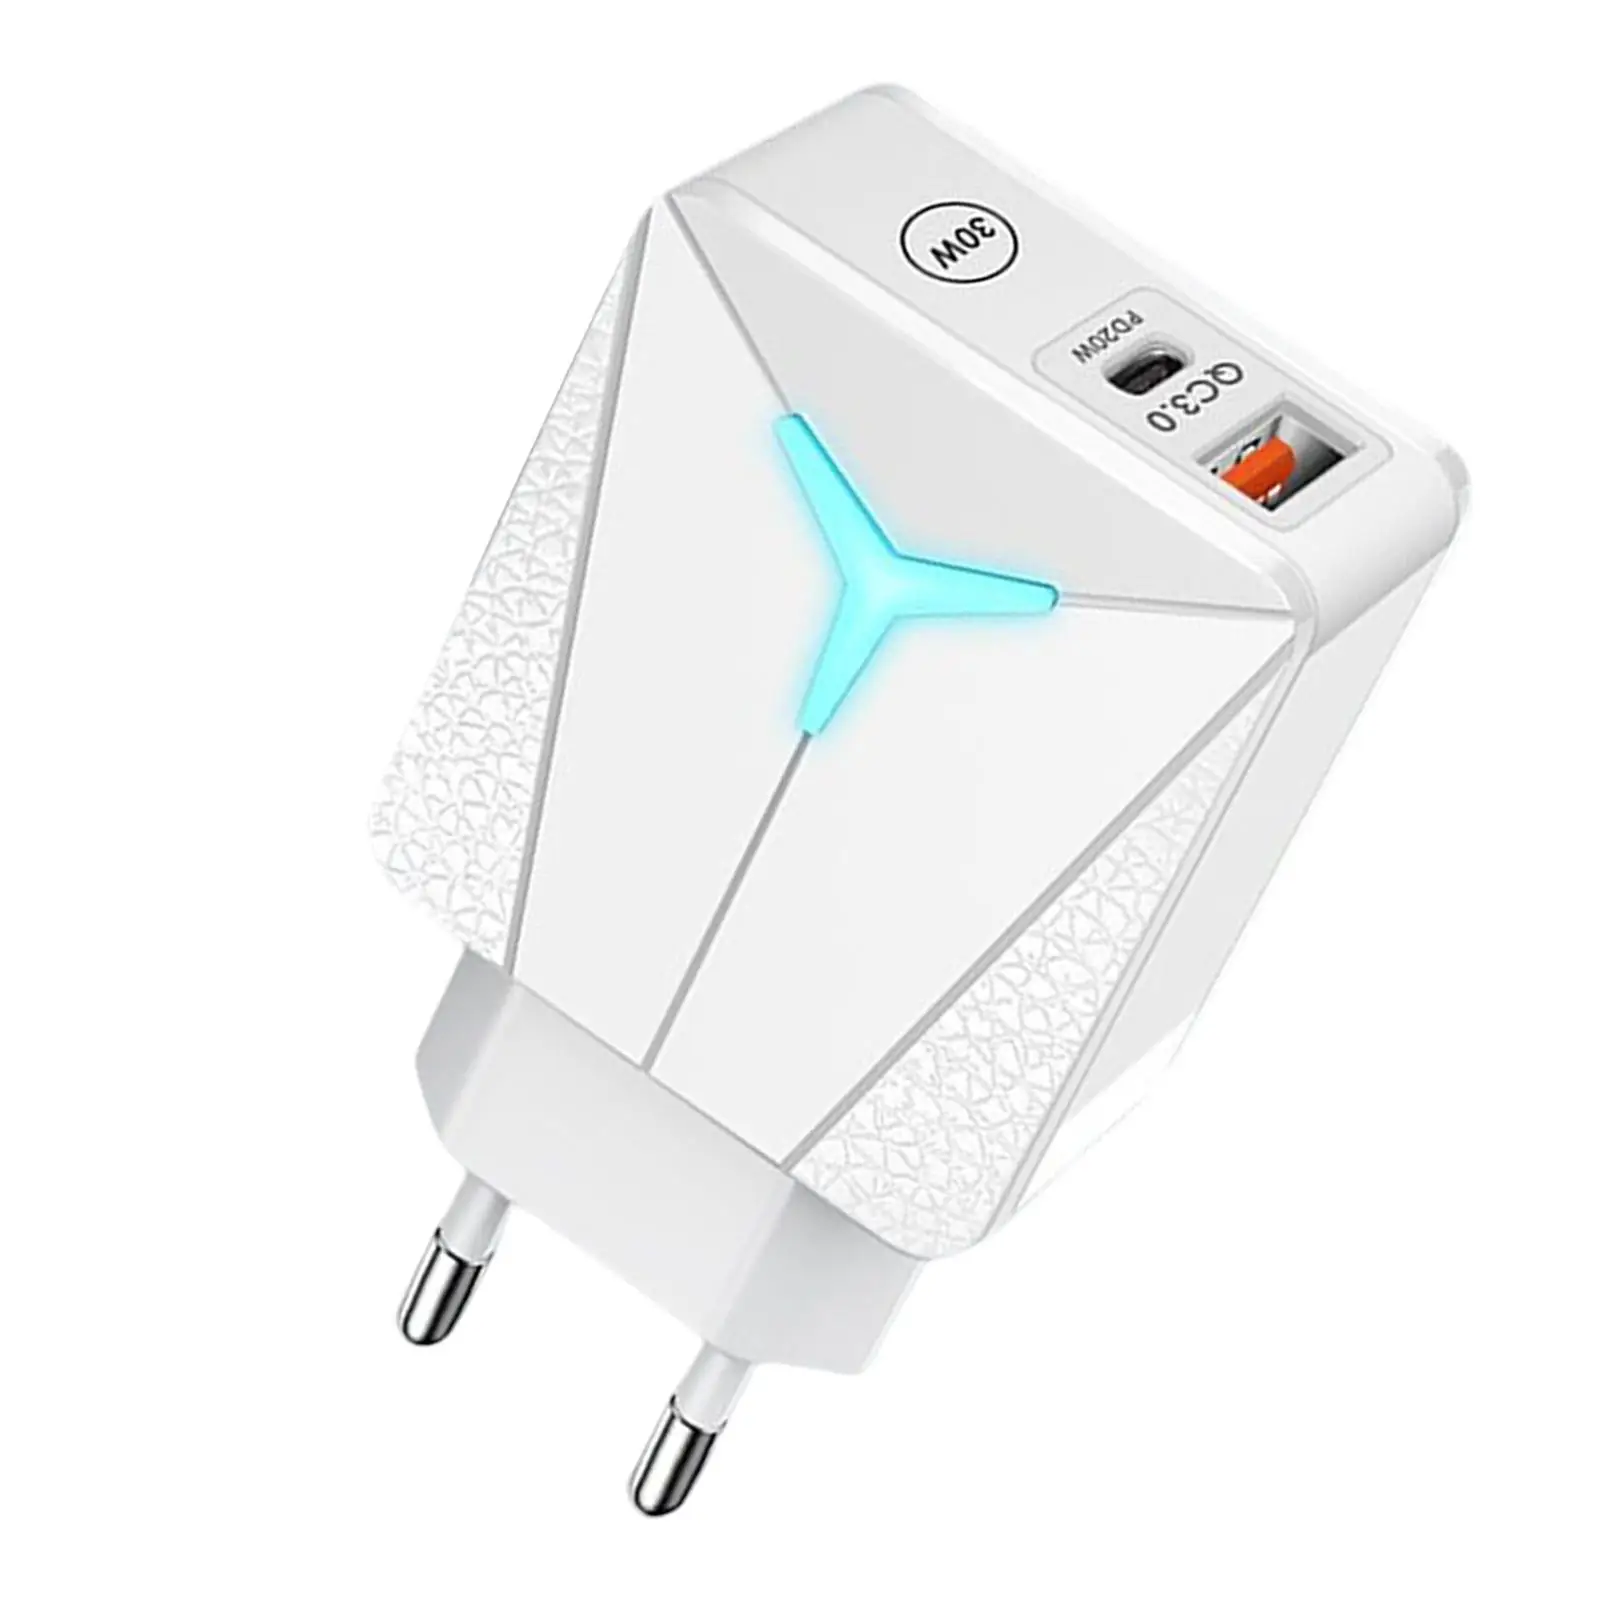 Phone Charger Adapter Portable Quick Charging PD 20W QC3.0 Dual Port USB Charging Block Wall Charger for Travel Home Use